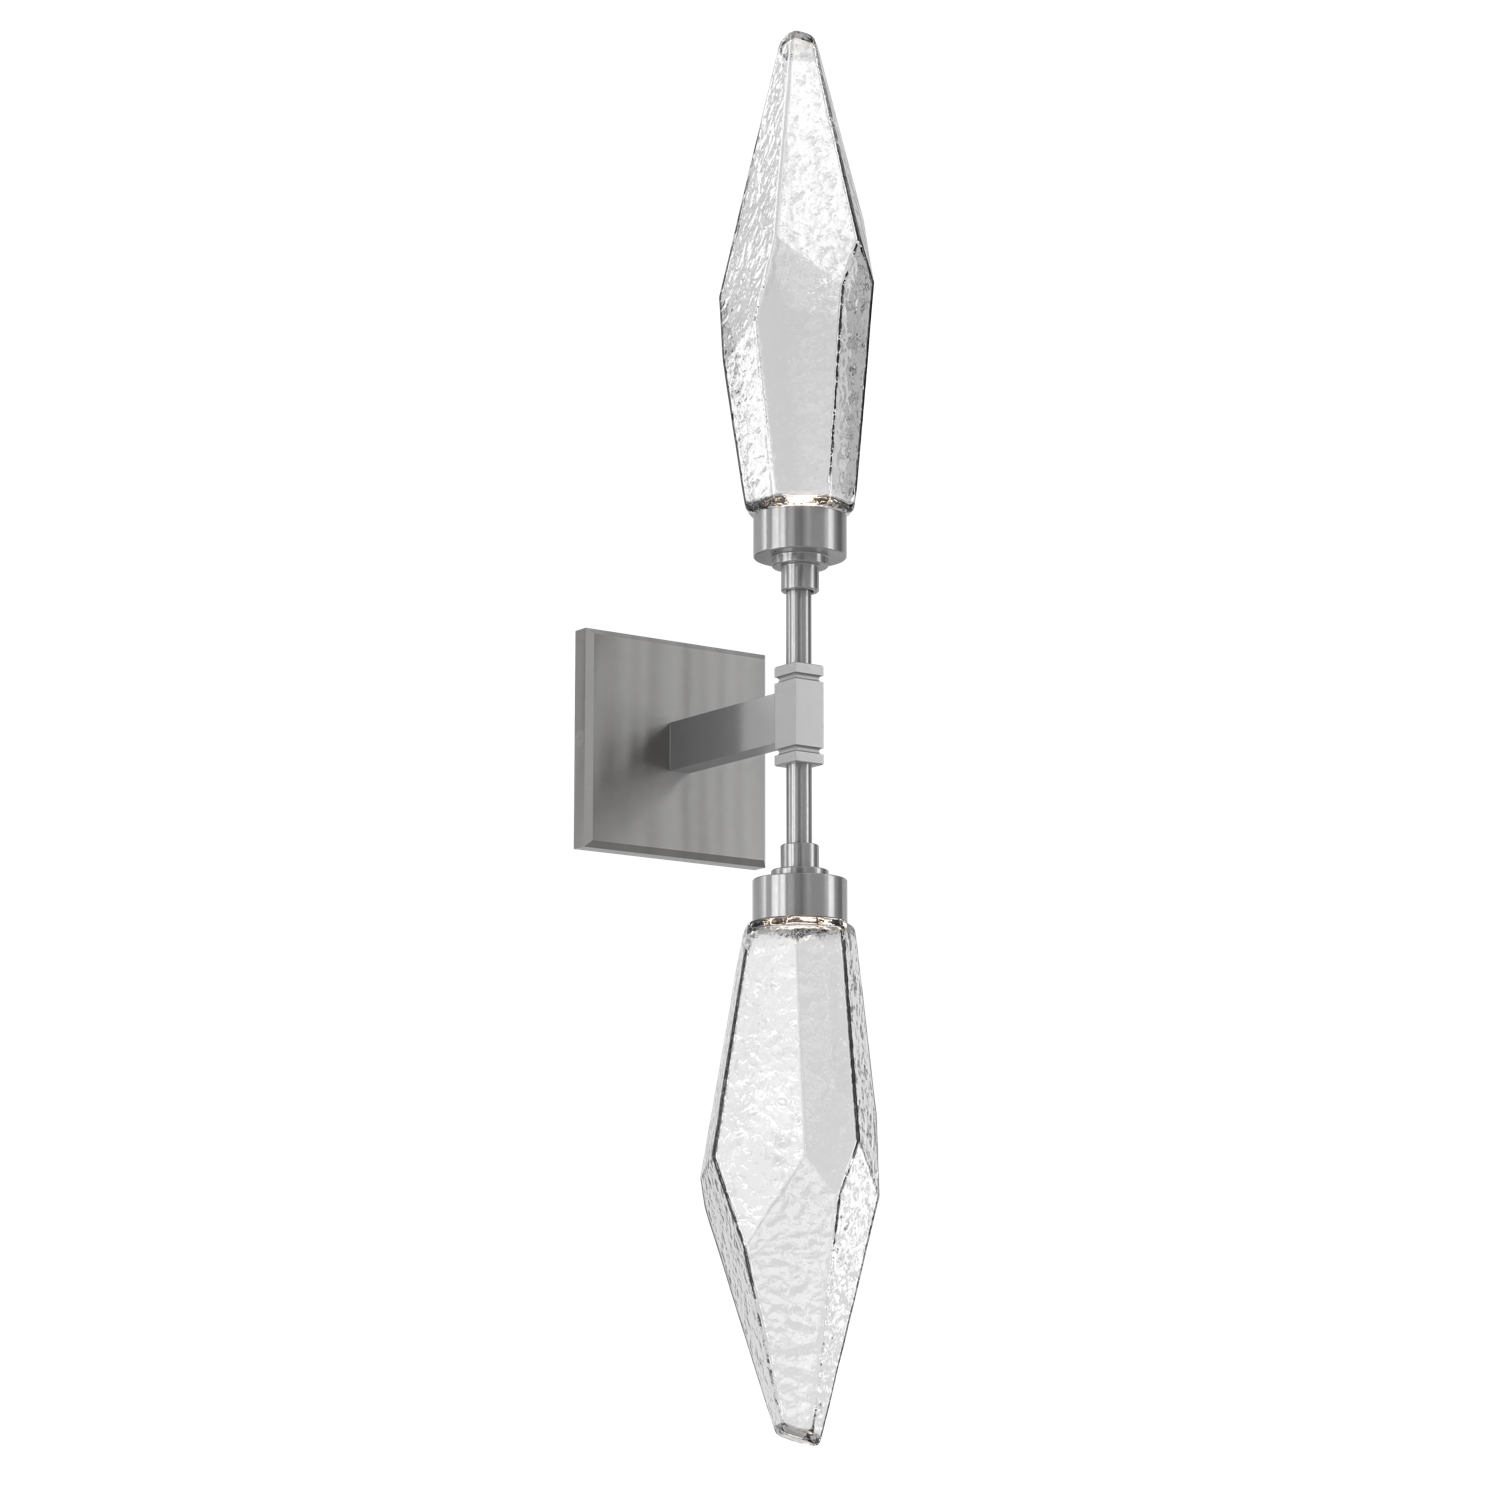 IDB0050-02-GM-CC-Hammerton-Studio-Rock-Crystal-wall-sconce-with-gunmetal-finish-and-clear-glass-shades-and-LED-lamping